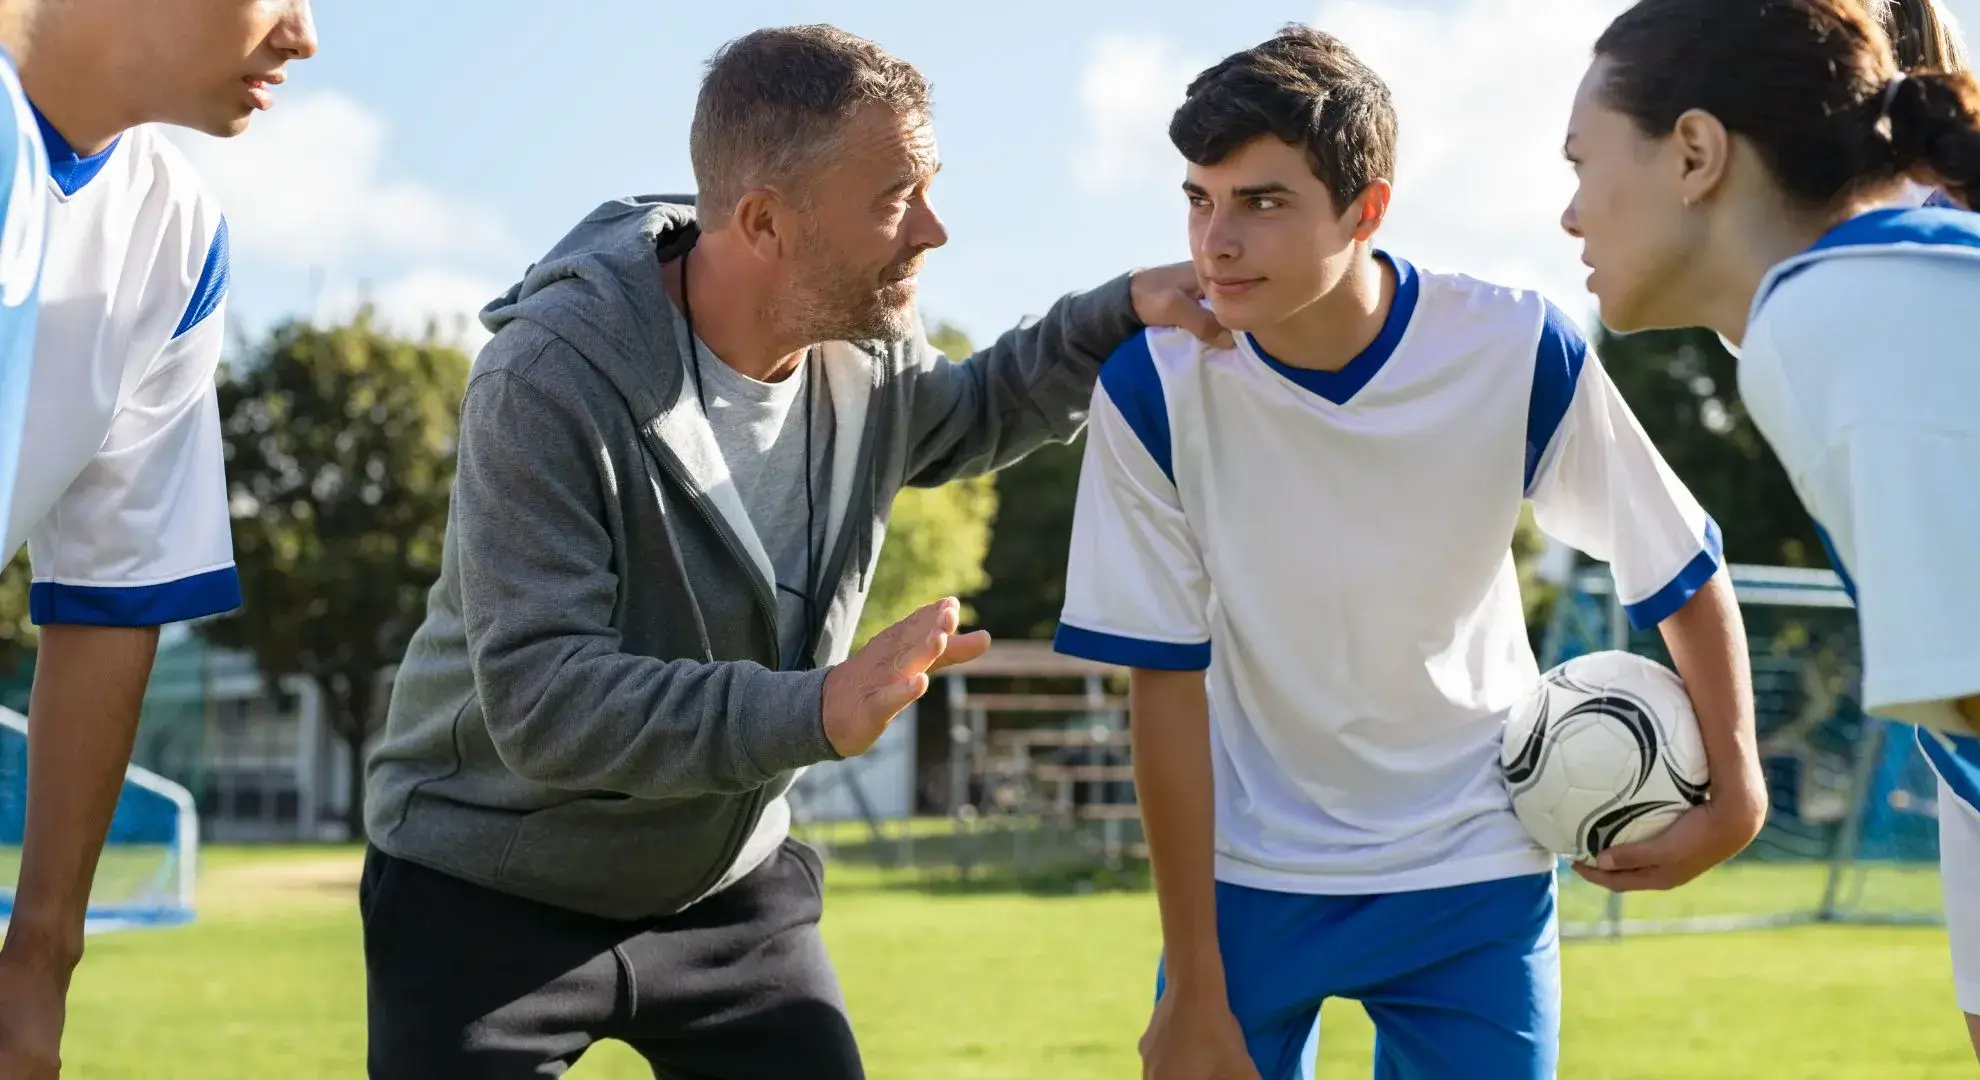 How to become a soccer coach